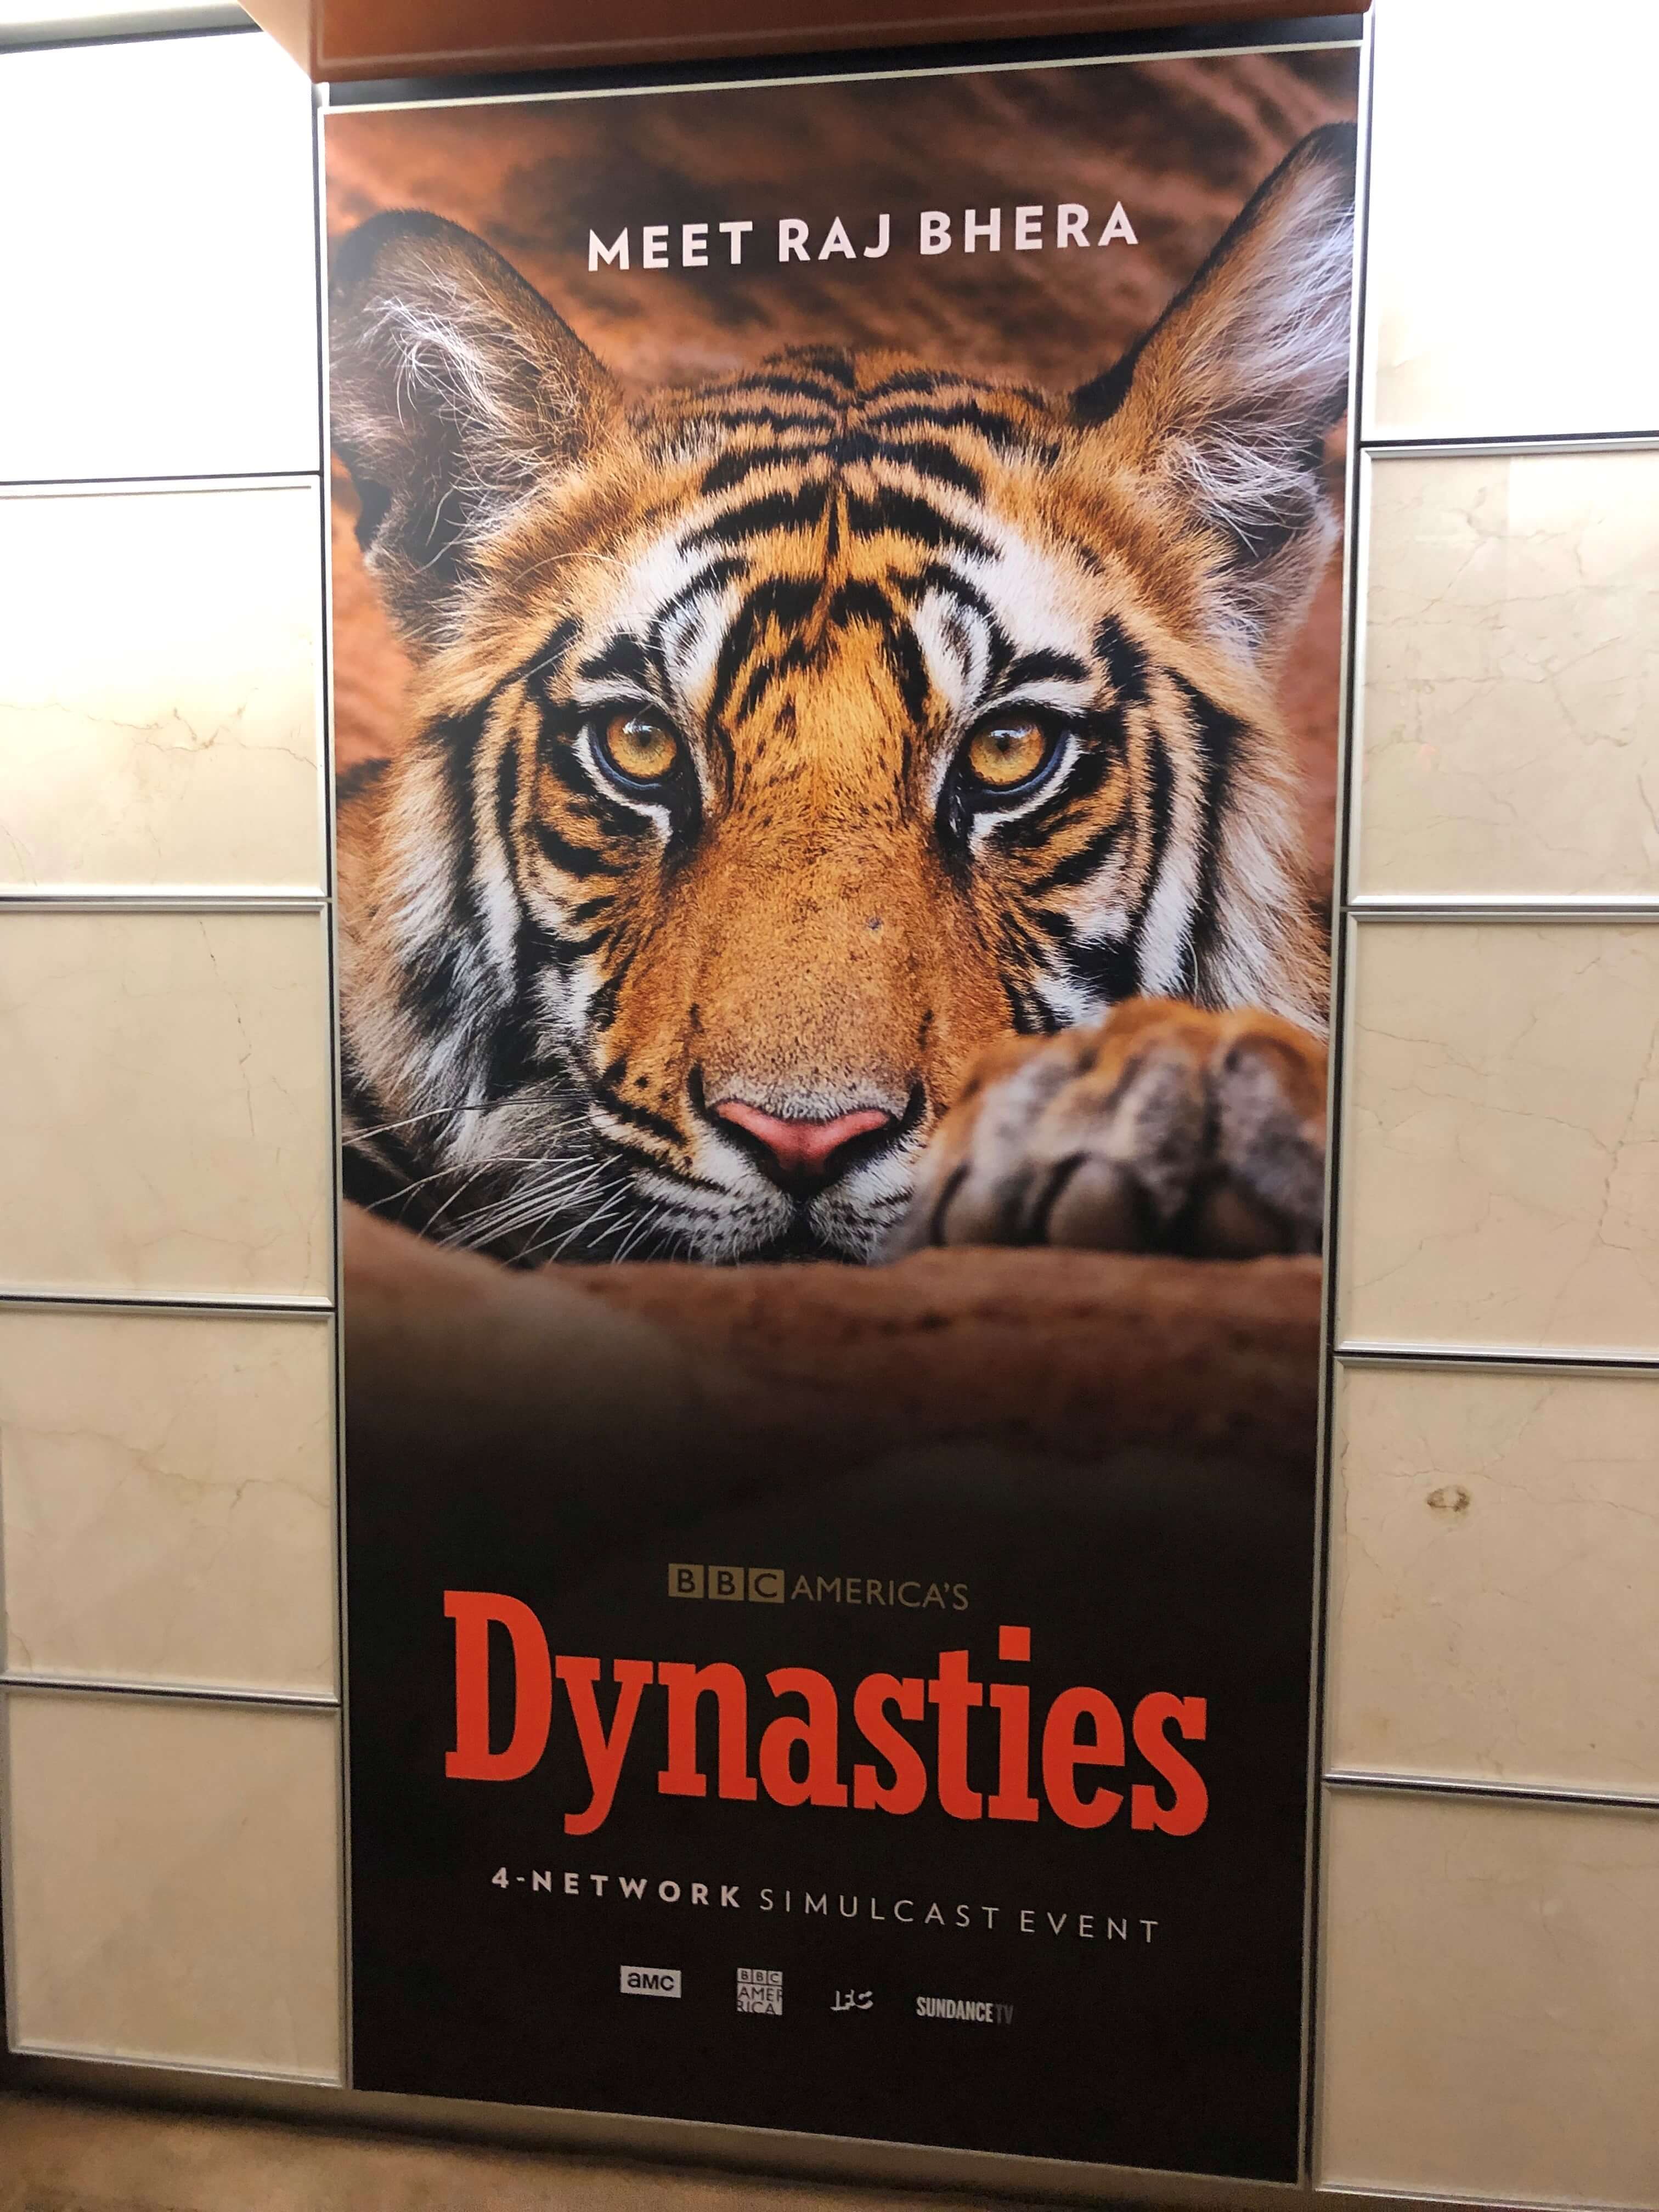 Creative Signage is important whether it’s in your office, restroom, outside, or in an elevator!  Talk about a captive audience.